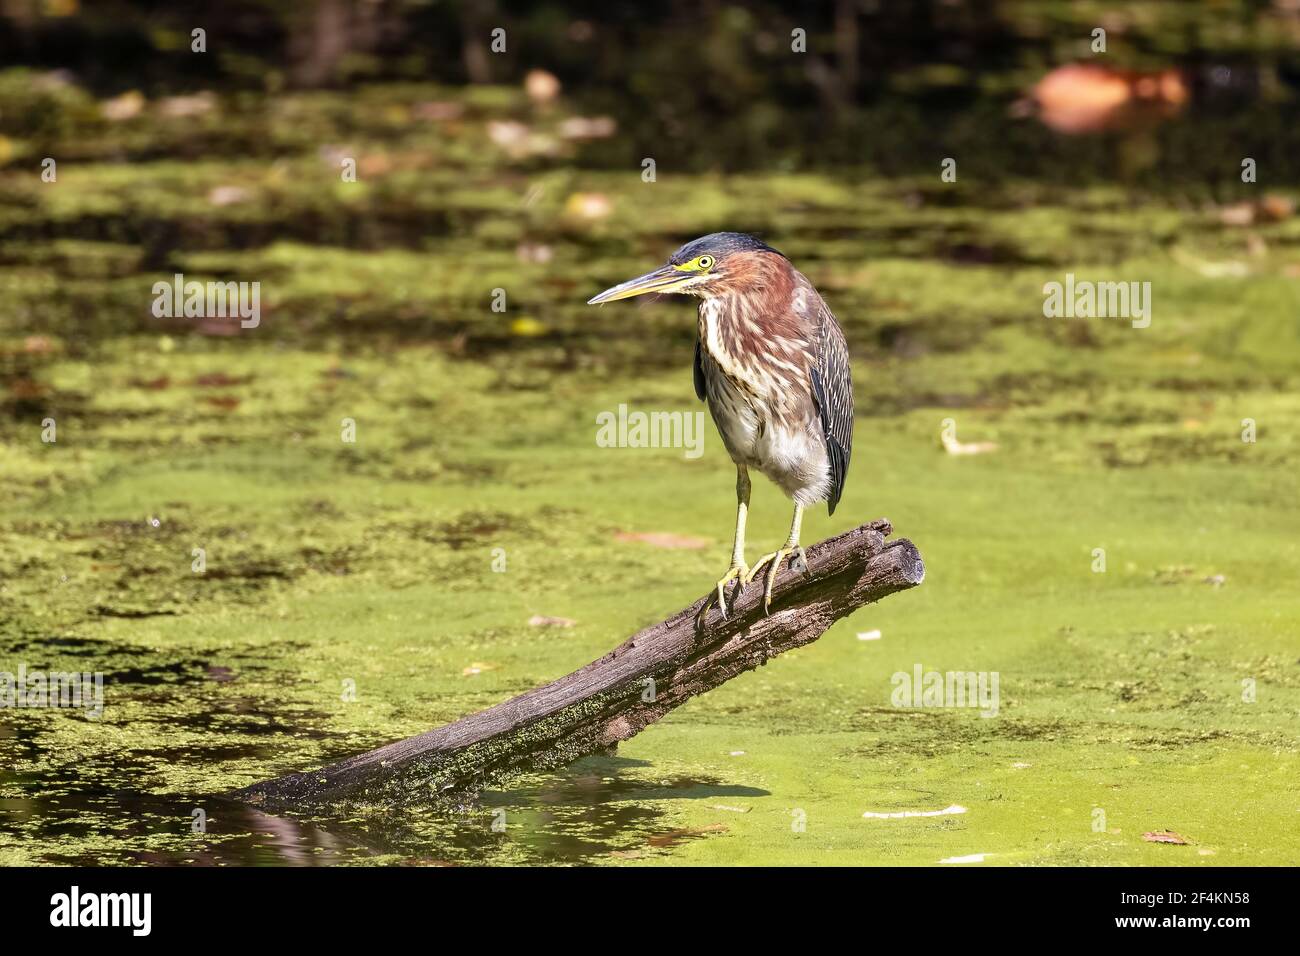 Green heron fishing from a tree stump over a stream covered in green duckweed Stock Photo